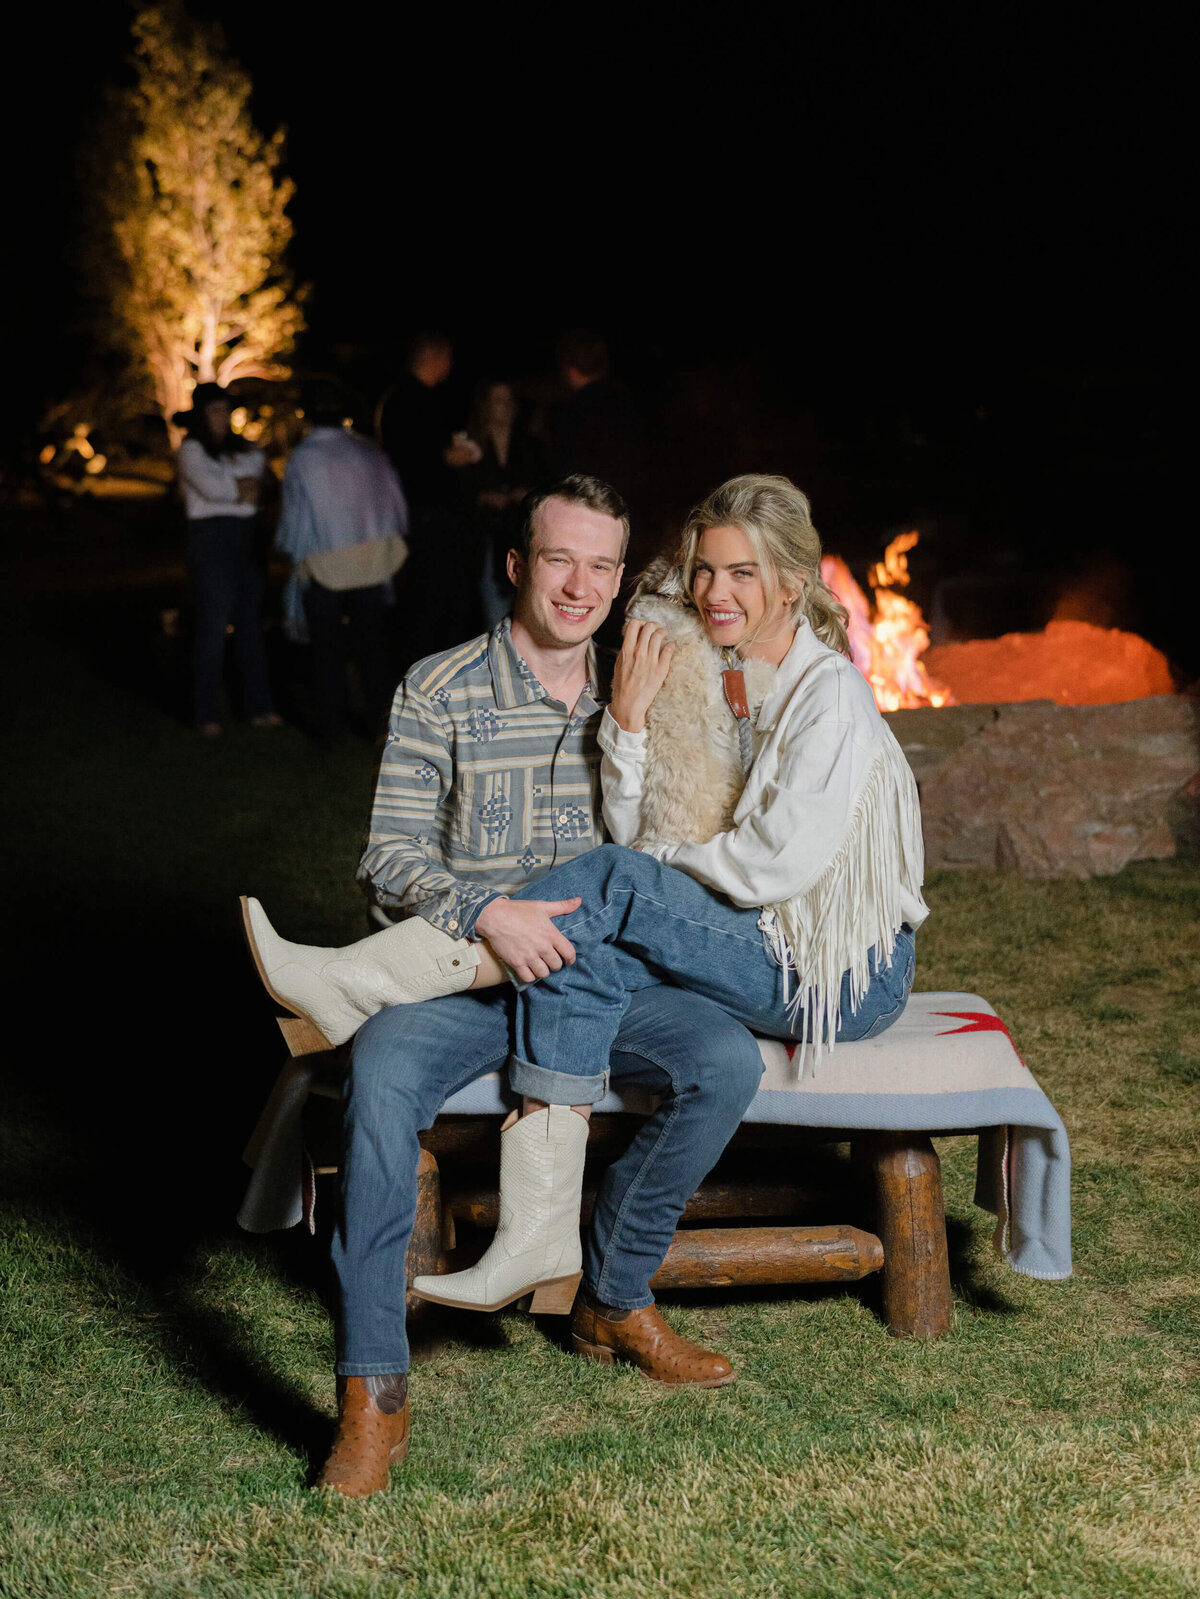 24-KT-Merry-Photography-Western-Wedding-Hutton-Bobby-Smiling